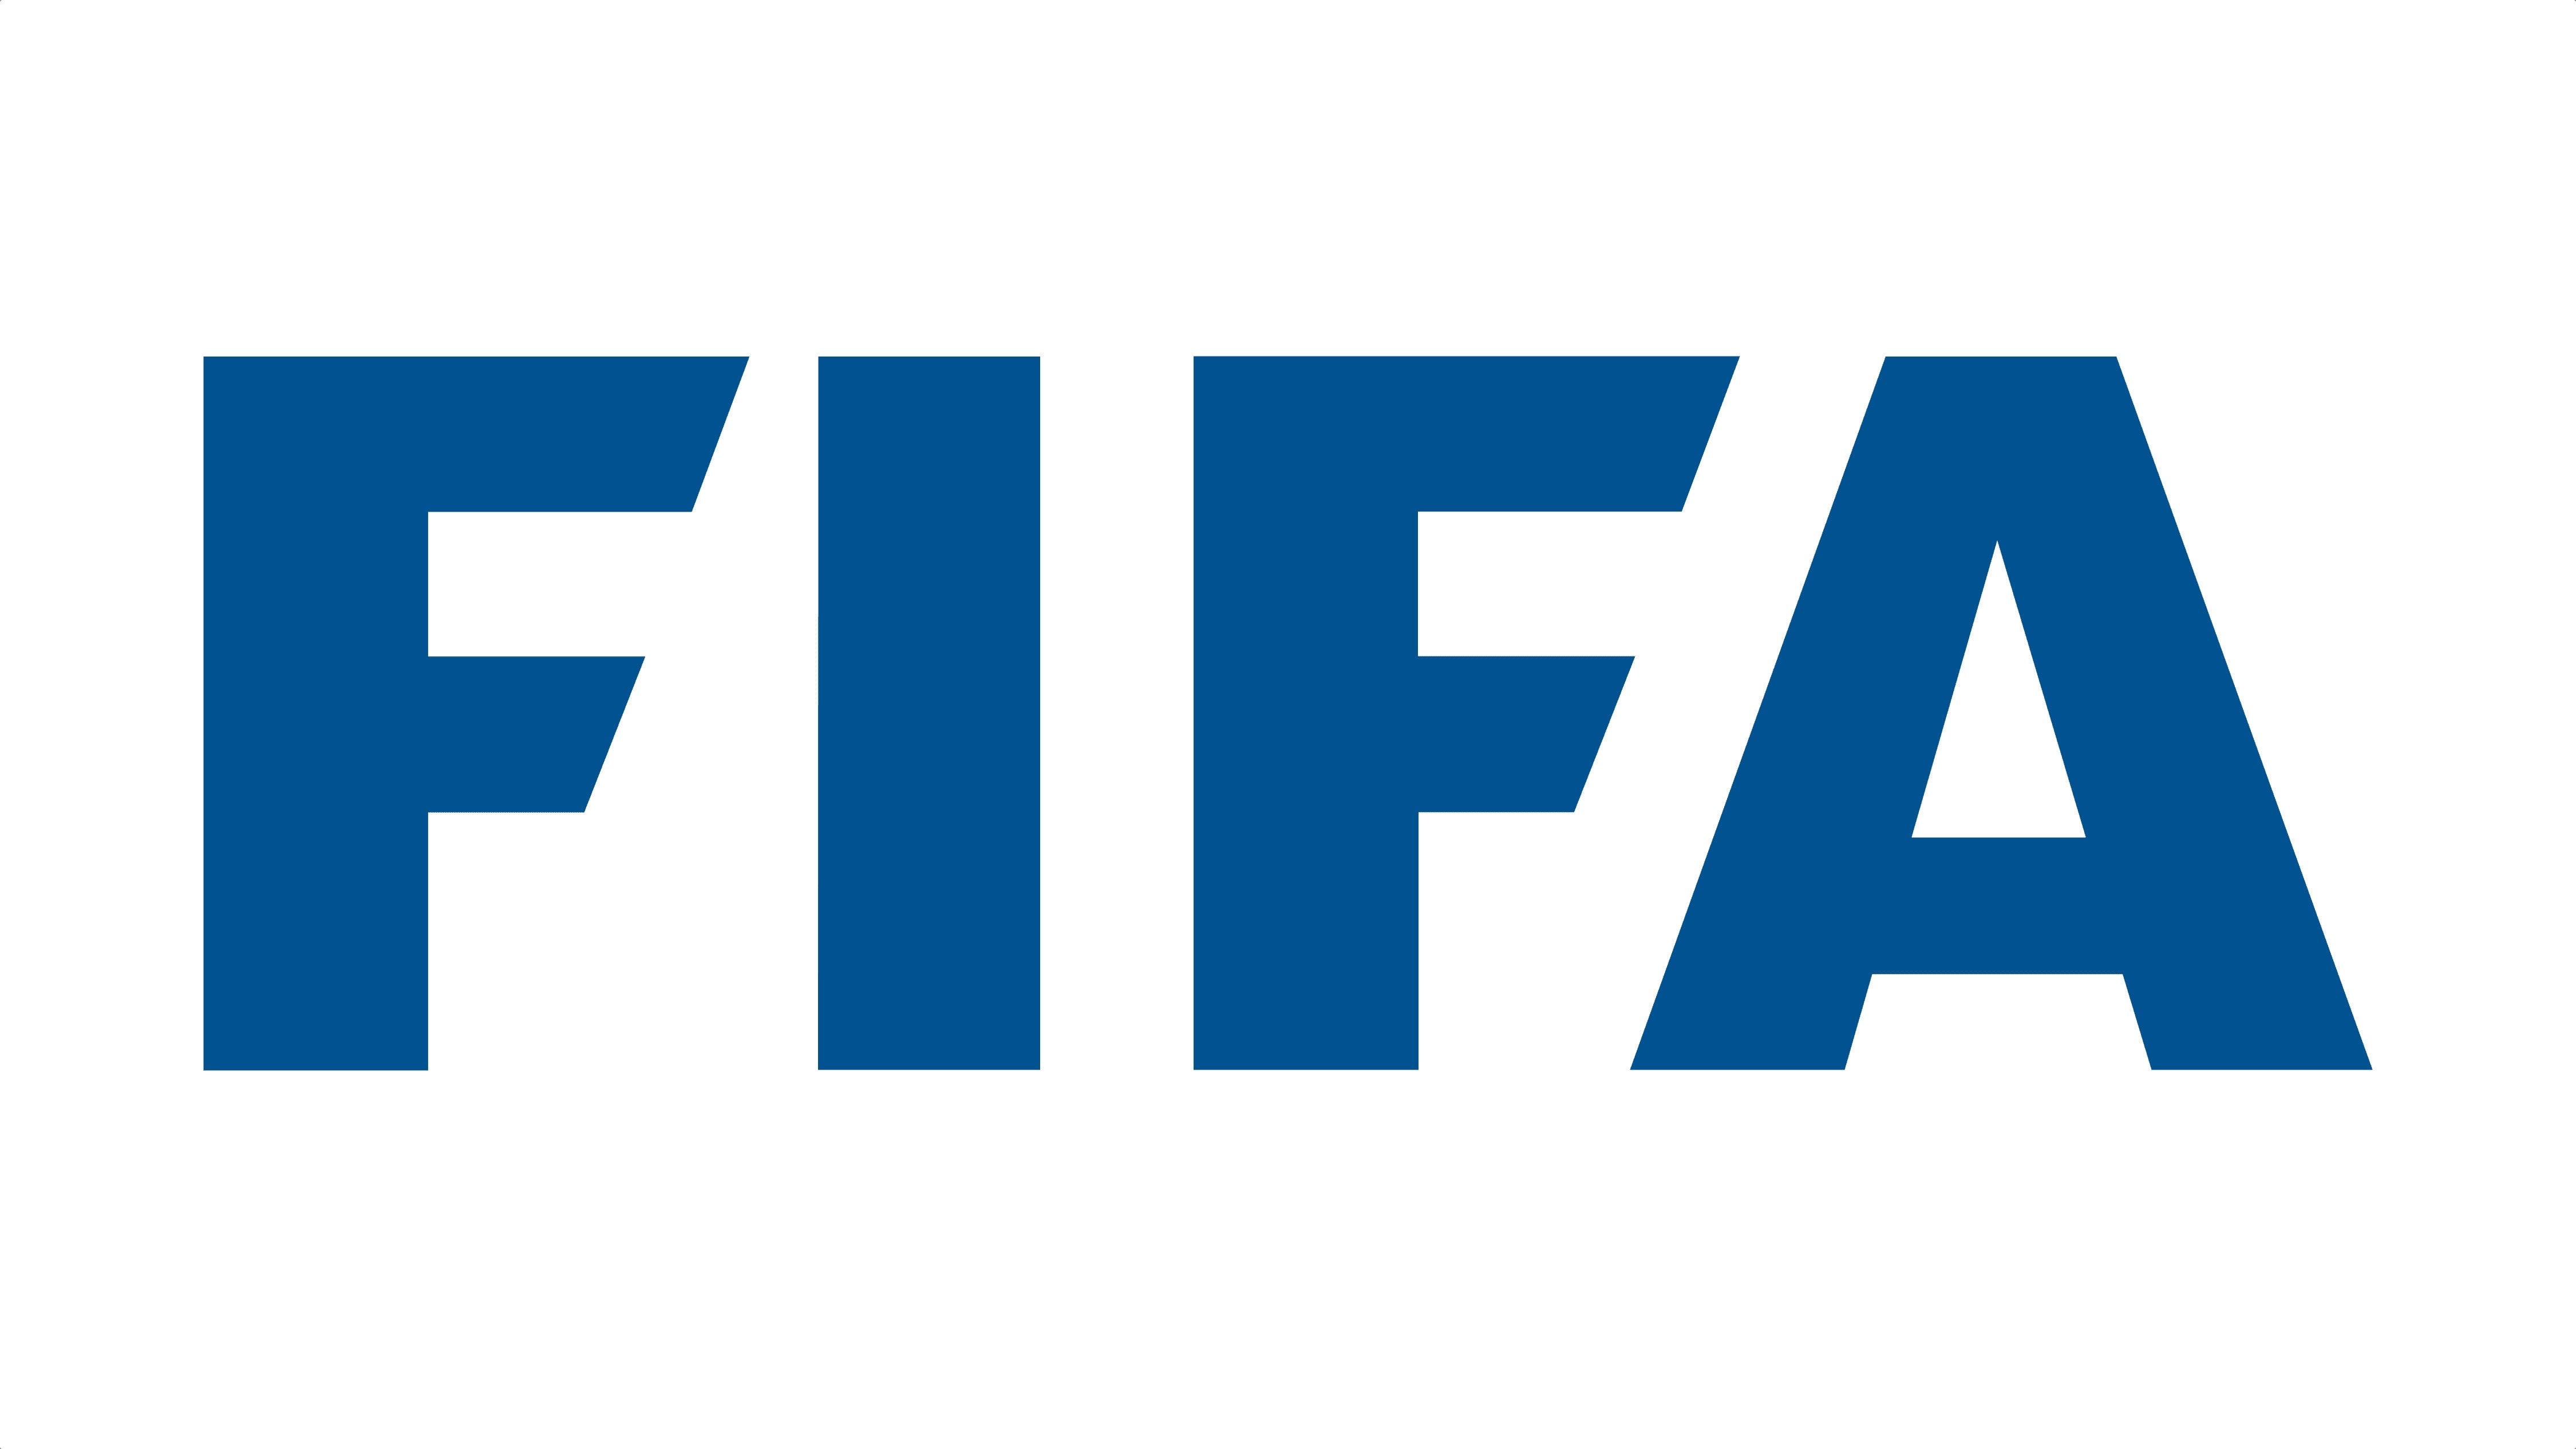 2026 FIFA World Cup logo was ripped for being awful, boring by fans